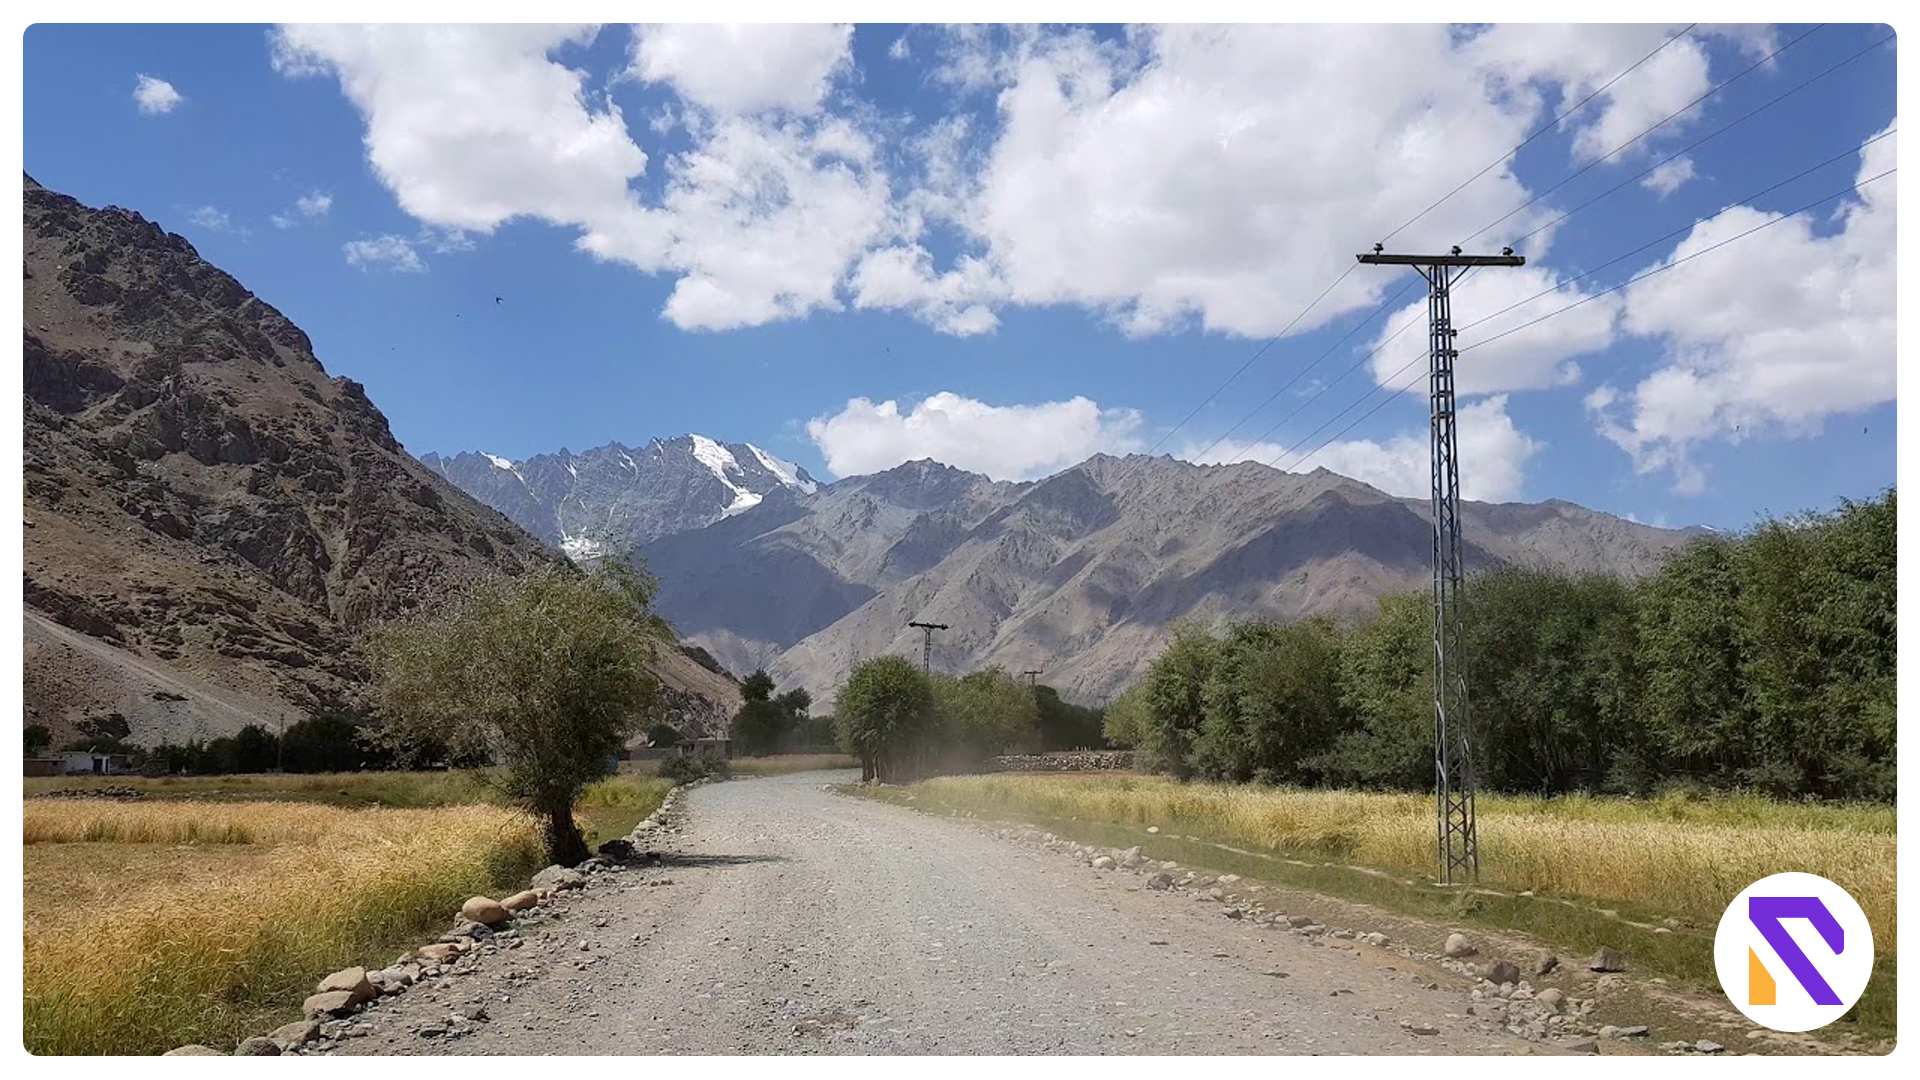 Chitral-Shandur Road's Construction Begins After 40 Years